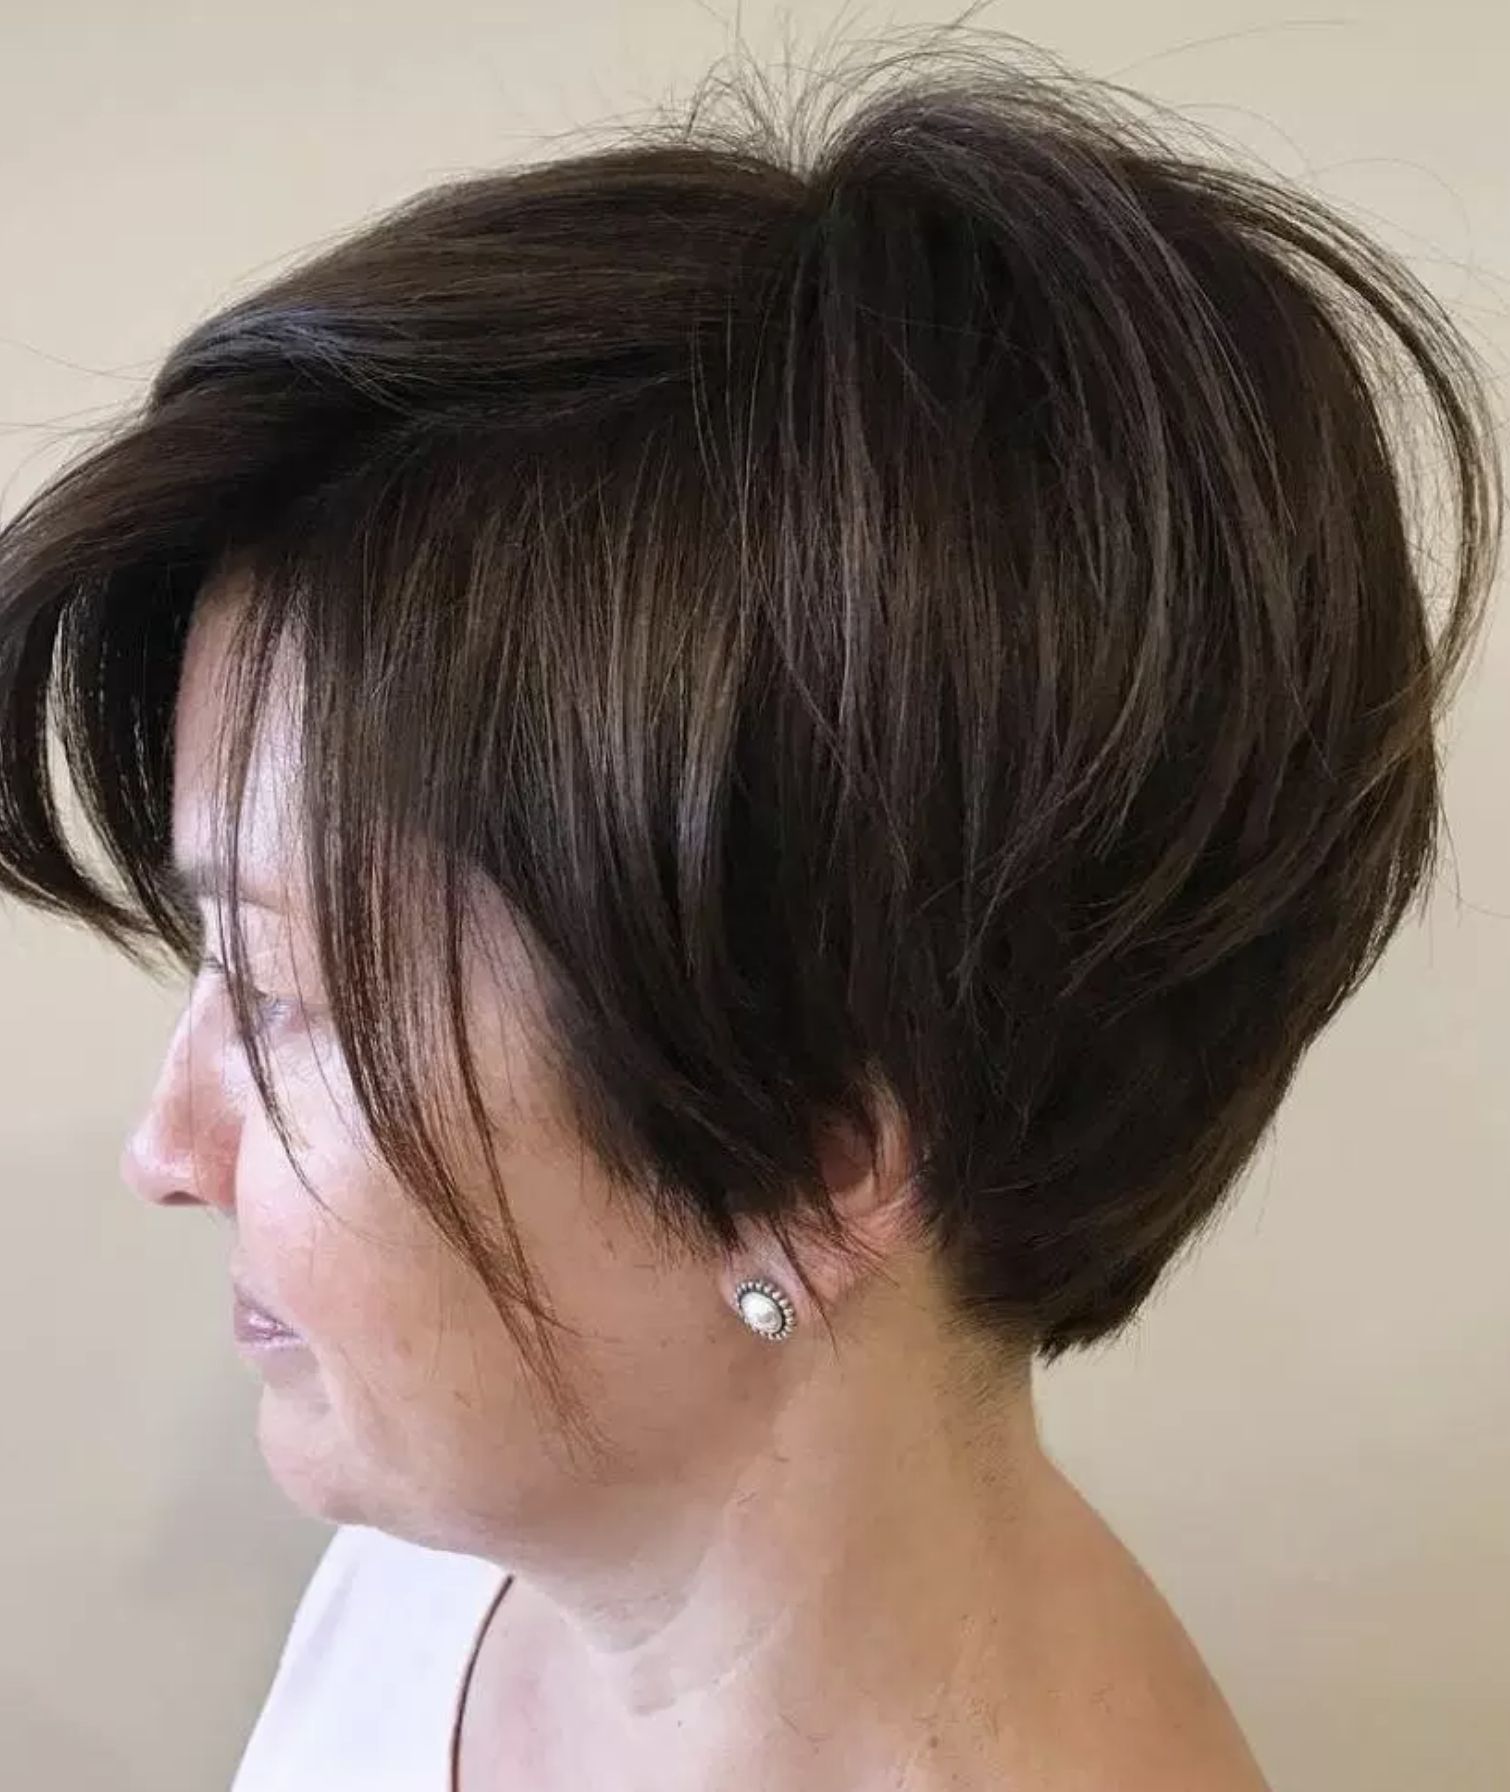 Short Hairstyles For Women Over 40 Many Women In Their 40s Opt For Inside Short Hairstyles For Women In Their 40s (View 21 of 25)